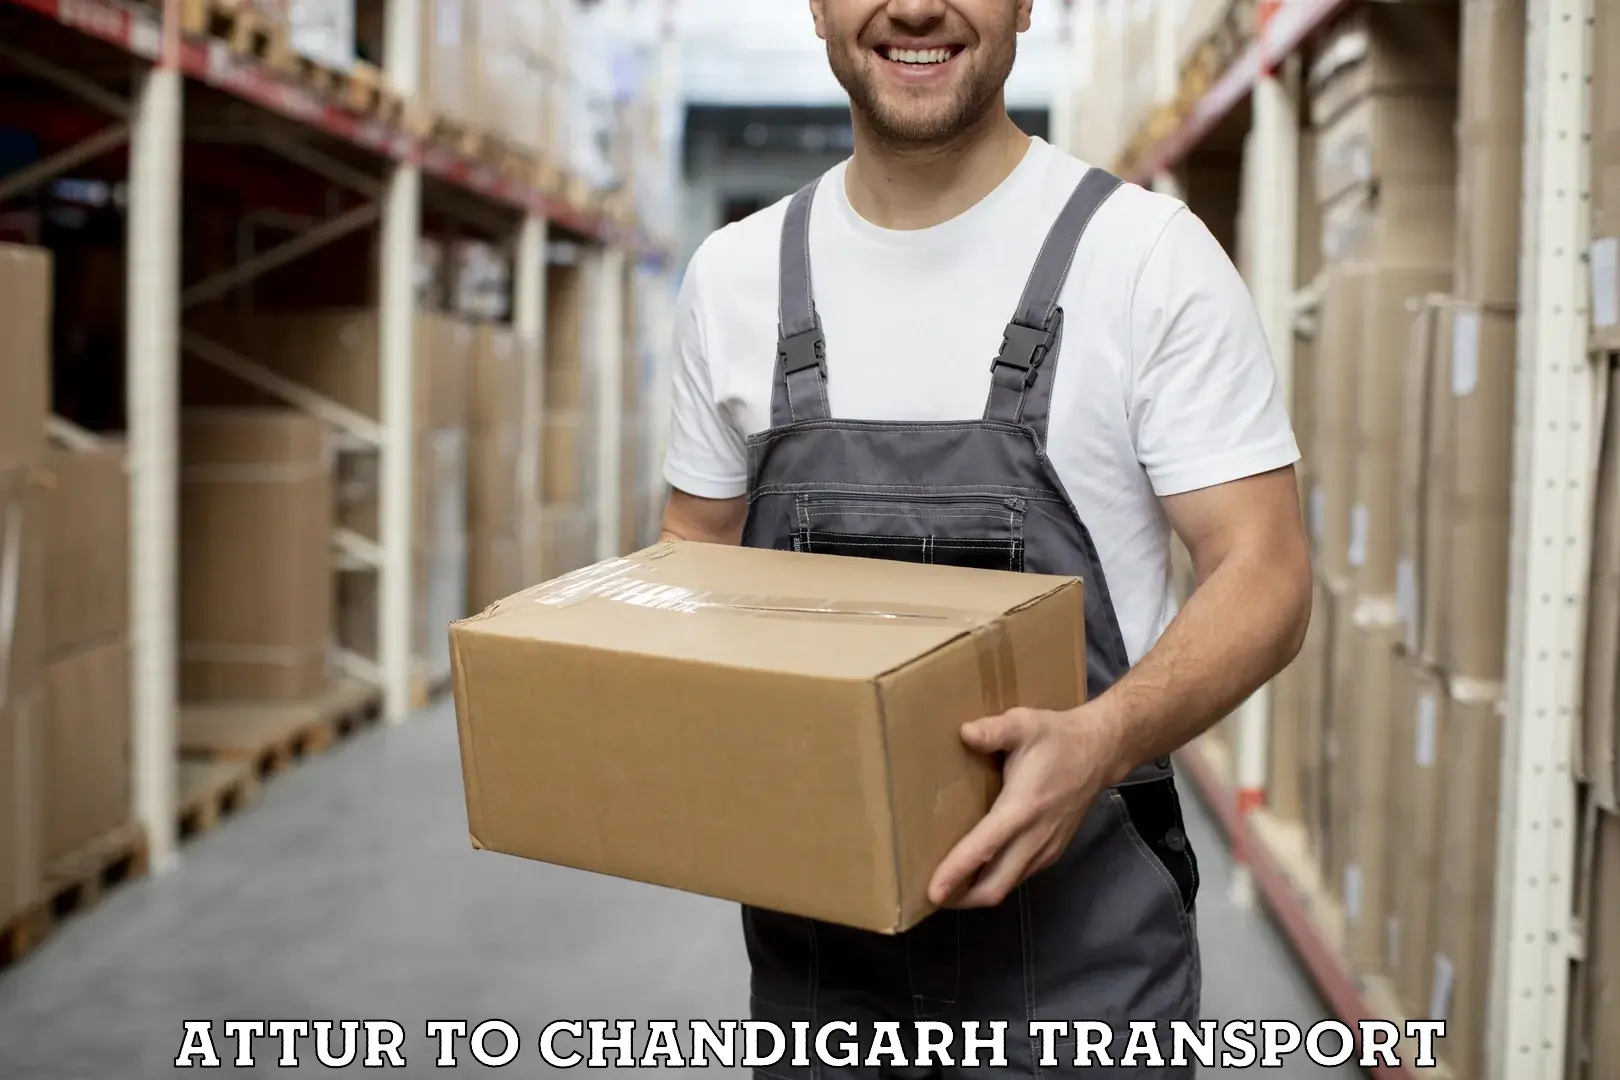 Daily parcel service transport Attur to Chandigarh